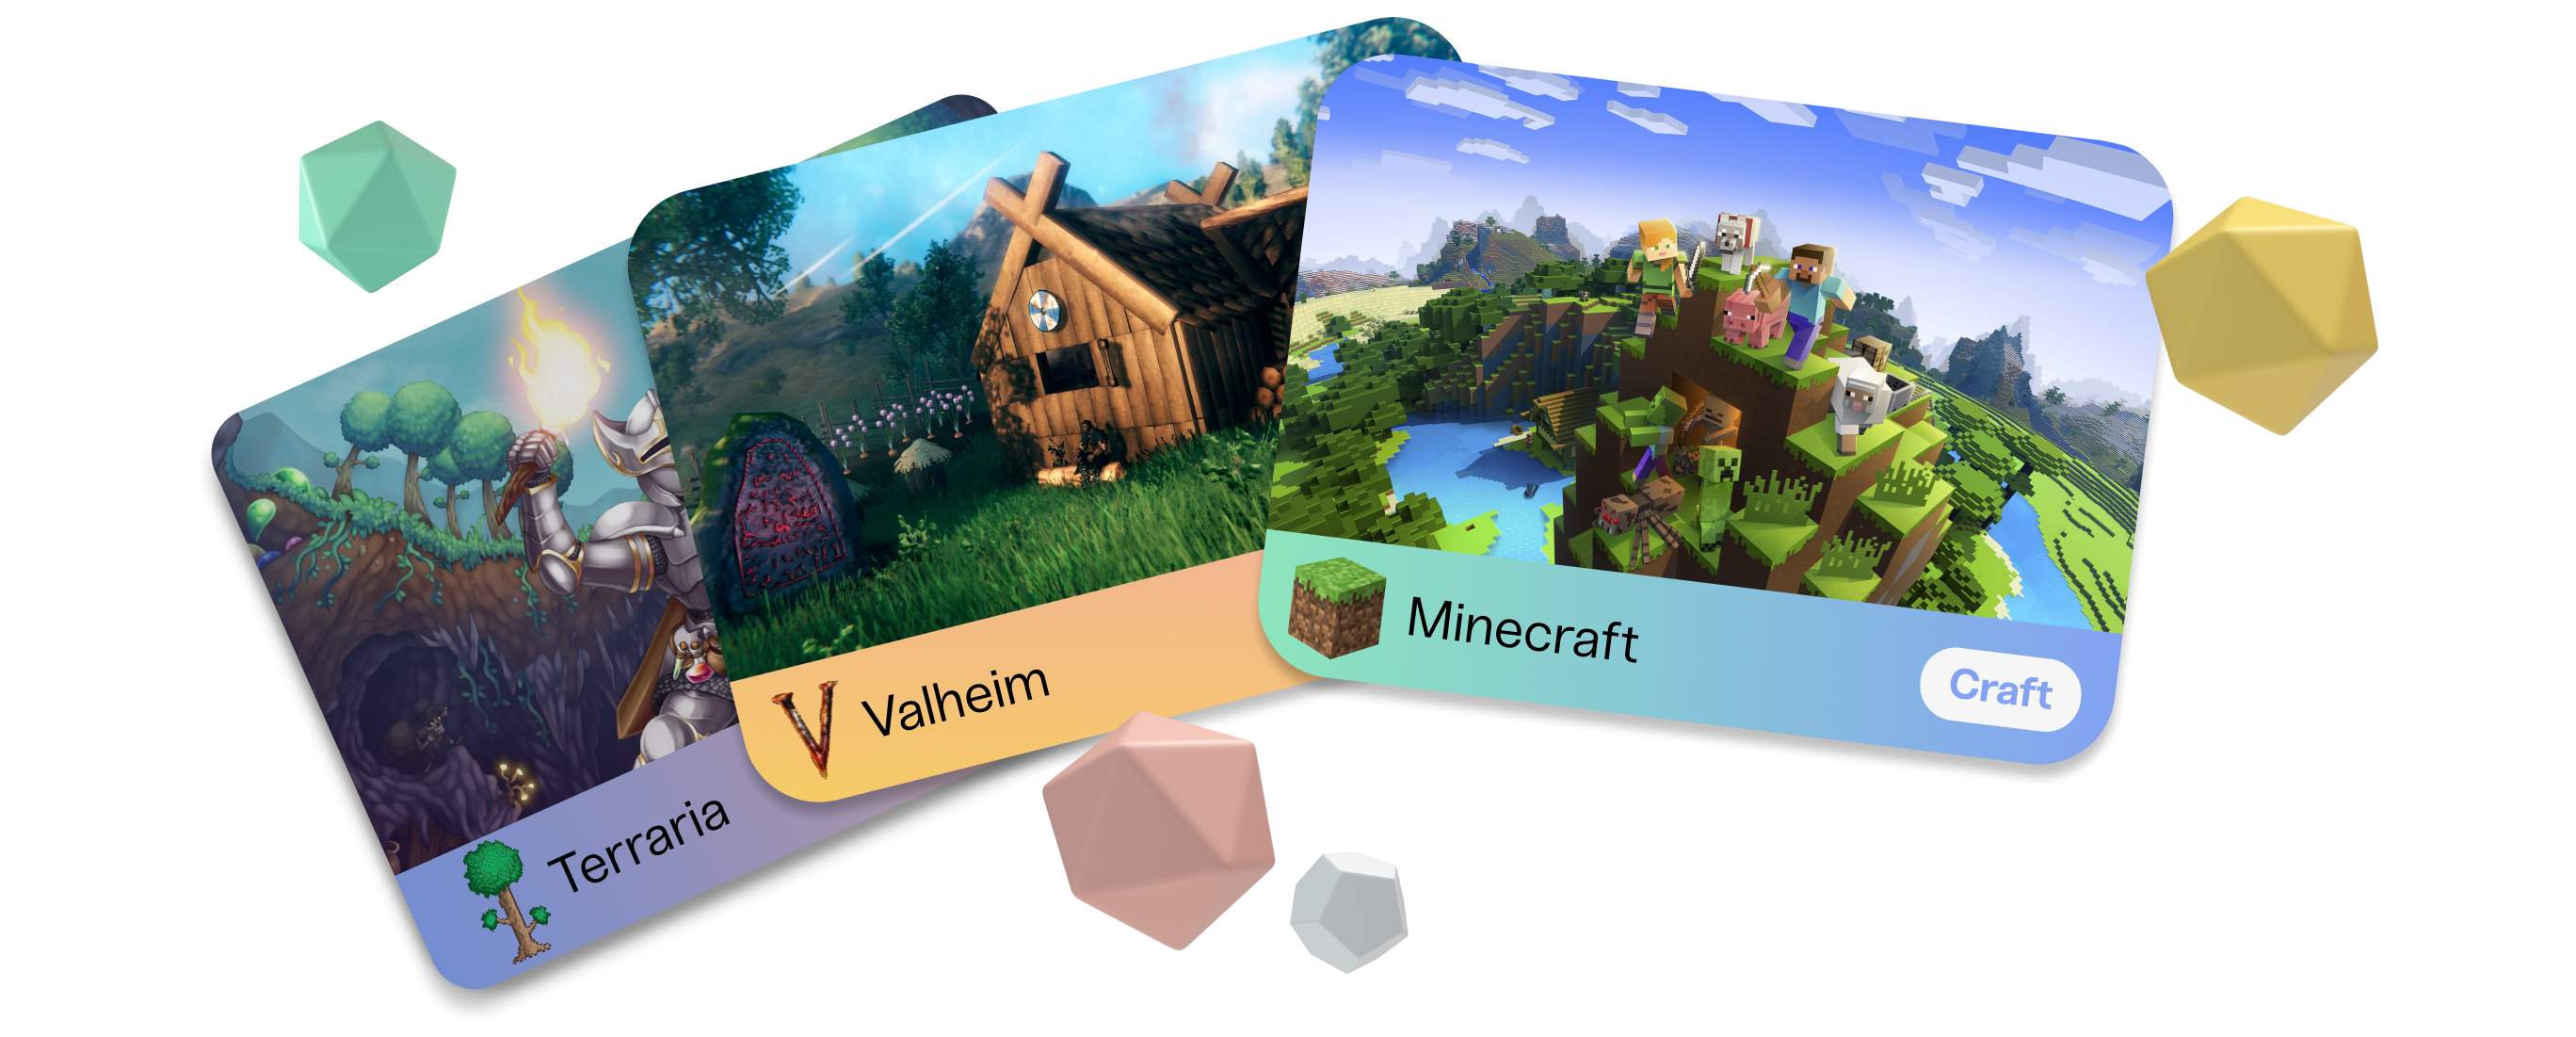 Terraria, Valheim, and Minecraft as little game cards stacked on each other.